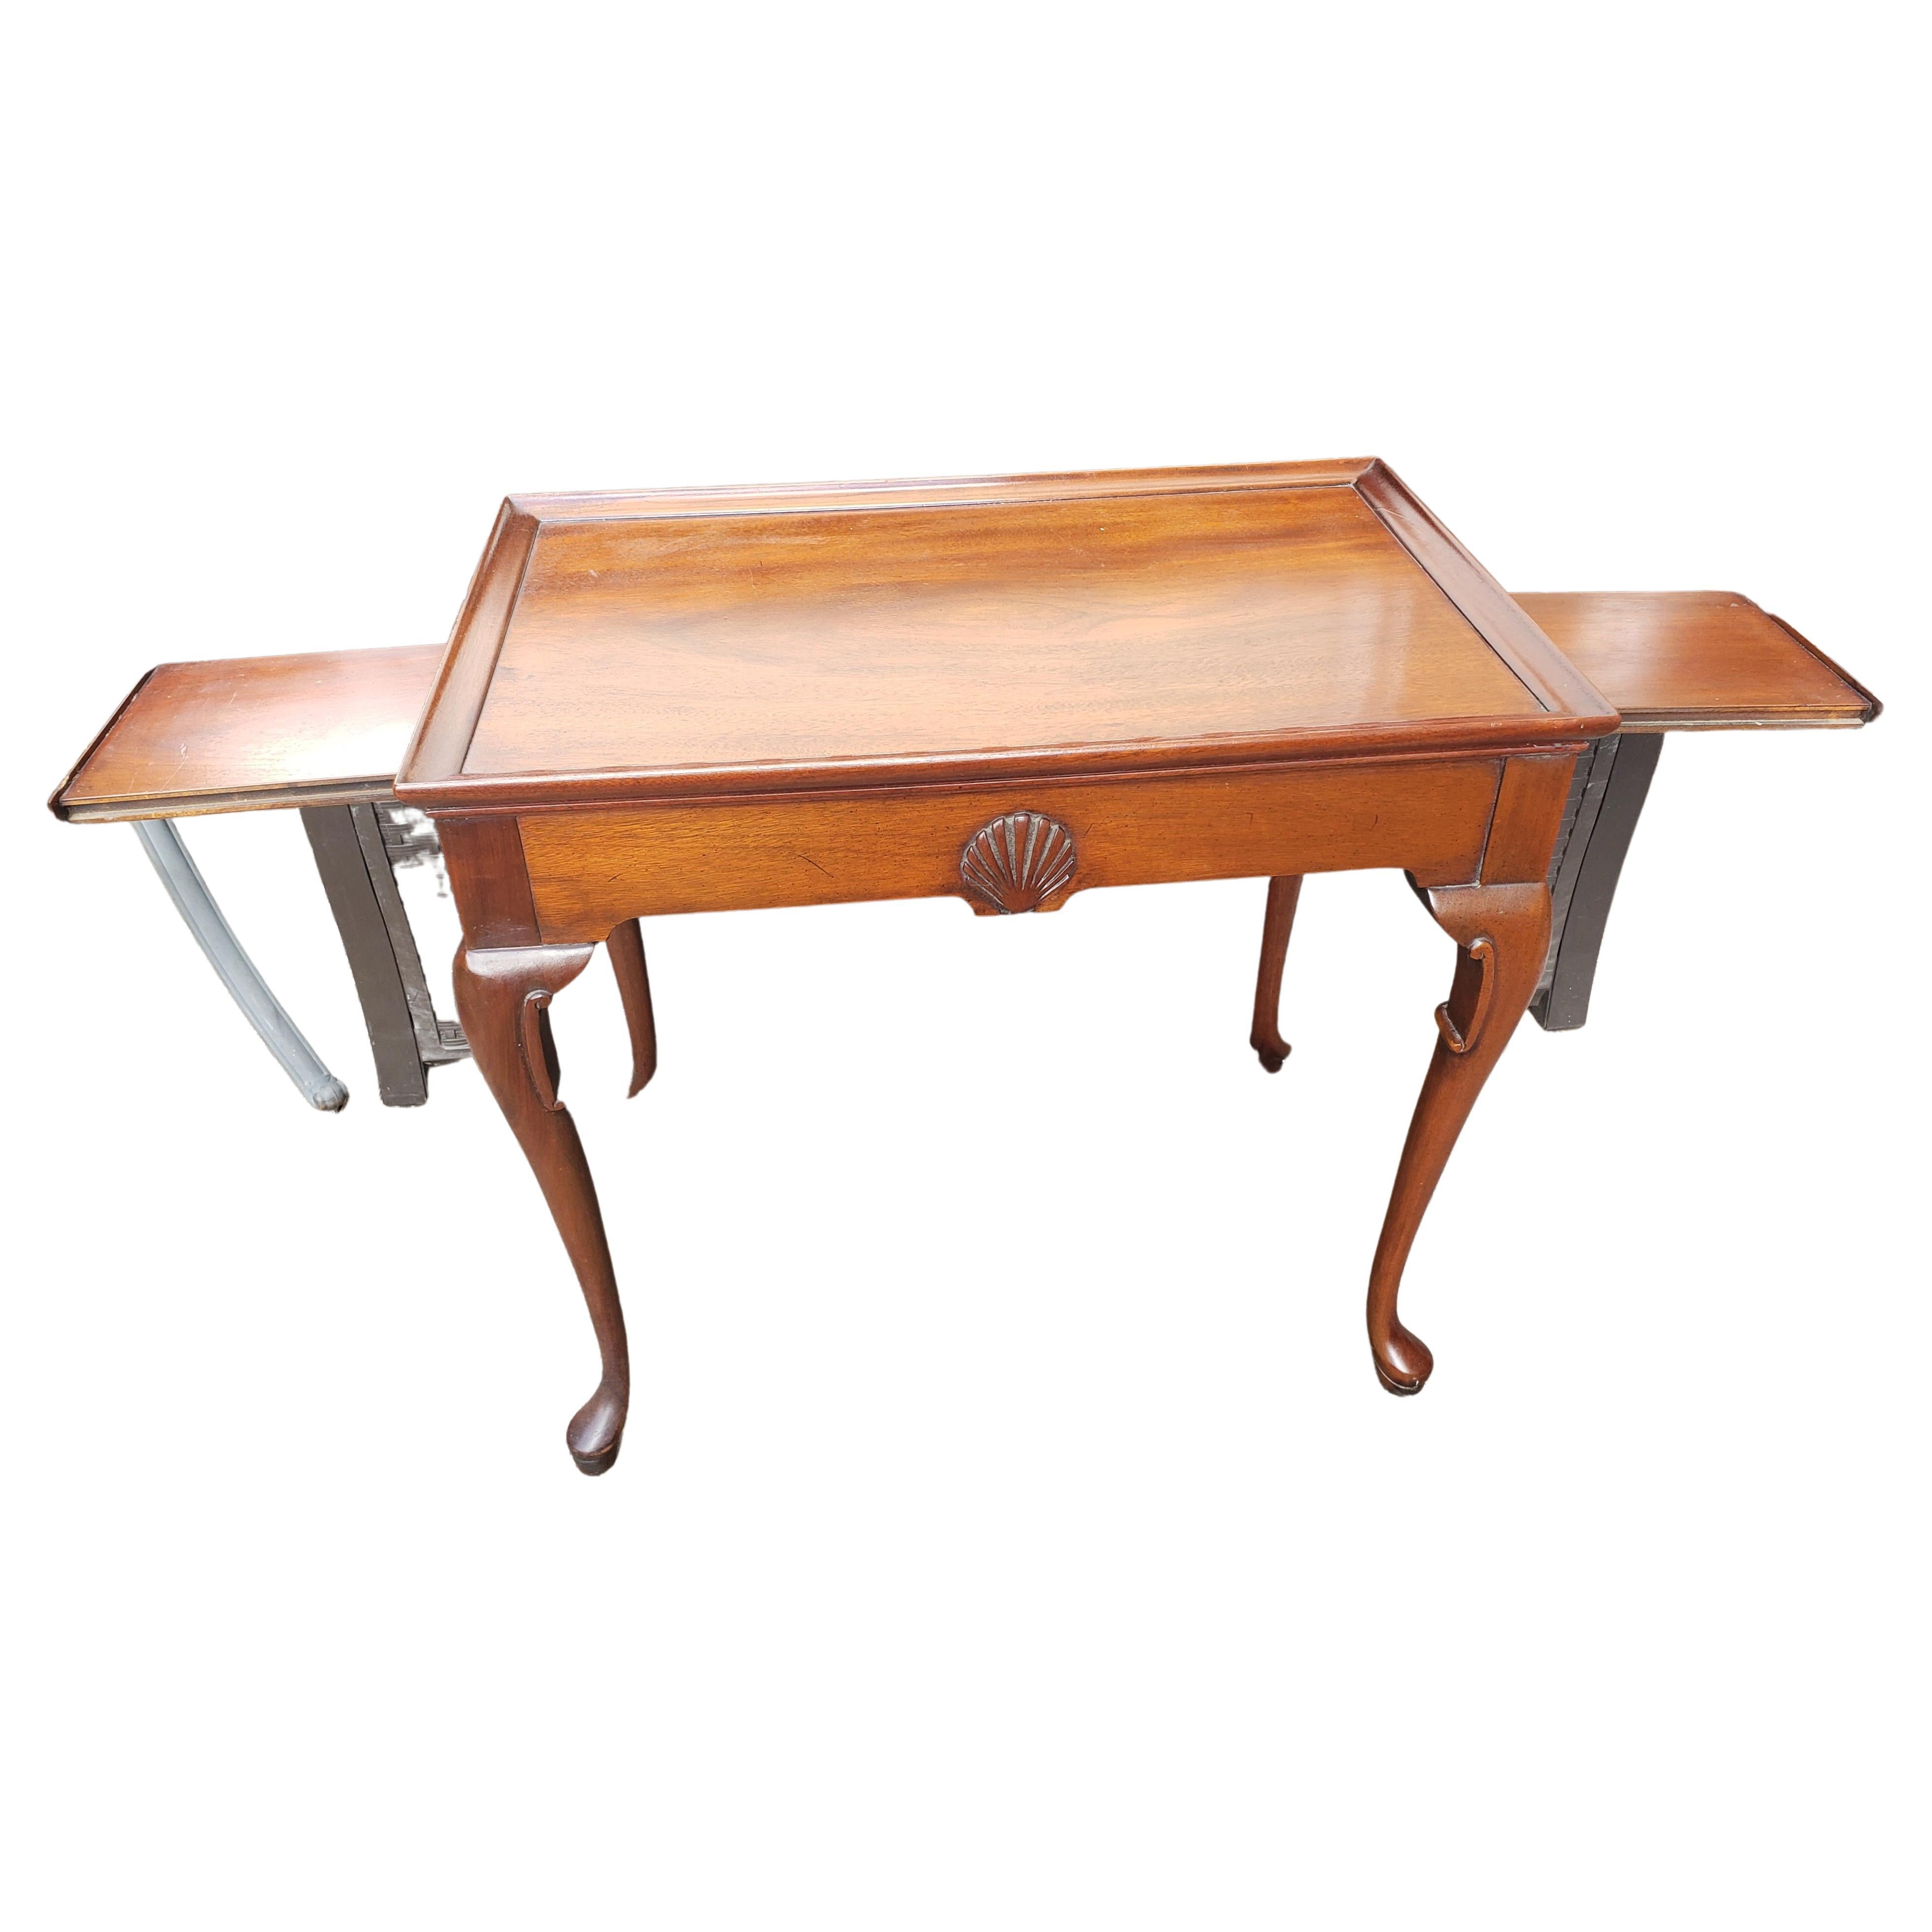 1950s English Mahogany Queen Anne Tray Top Tea Table by Hickory Chair Co. In Good Condition For Sale In Germantown, MD